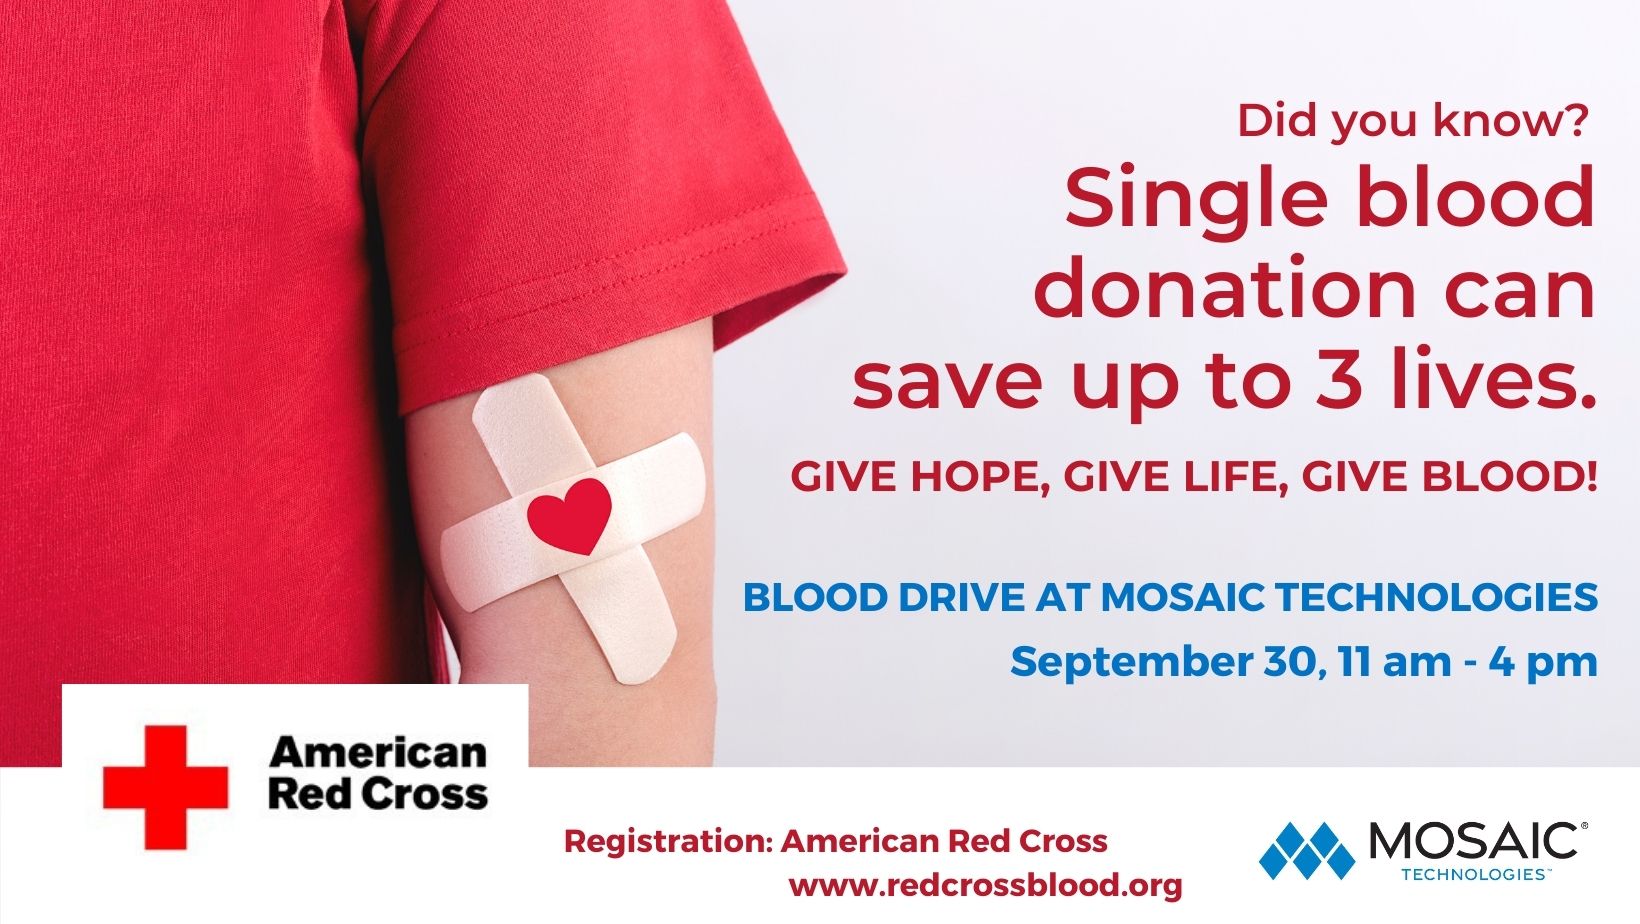 Red Cross Blood Drive at Mosaic Technologies in Cameron, Wi | Mosaic Technolgies